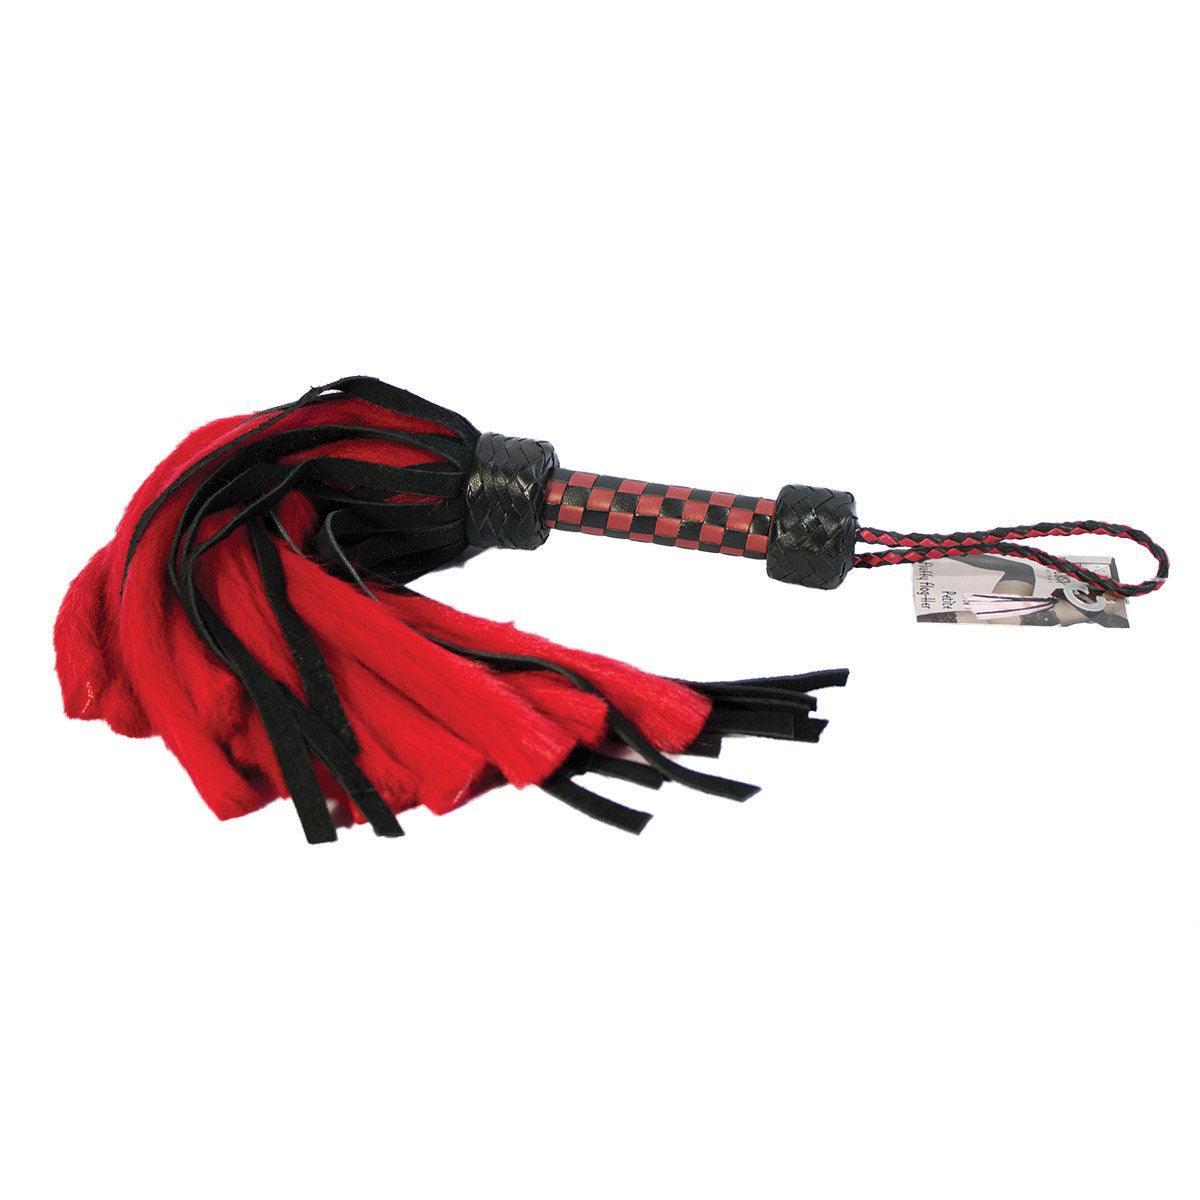 Suede and Fluff MINI Flogger - 18" - Red-Black - shop enby